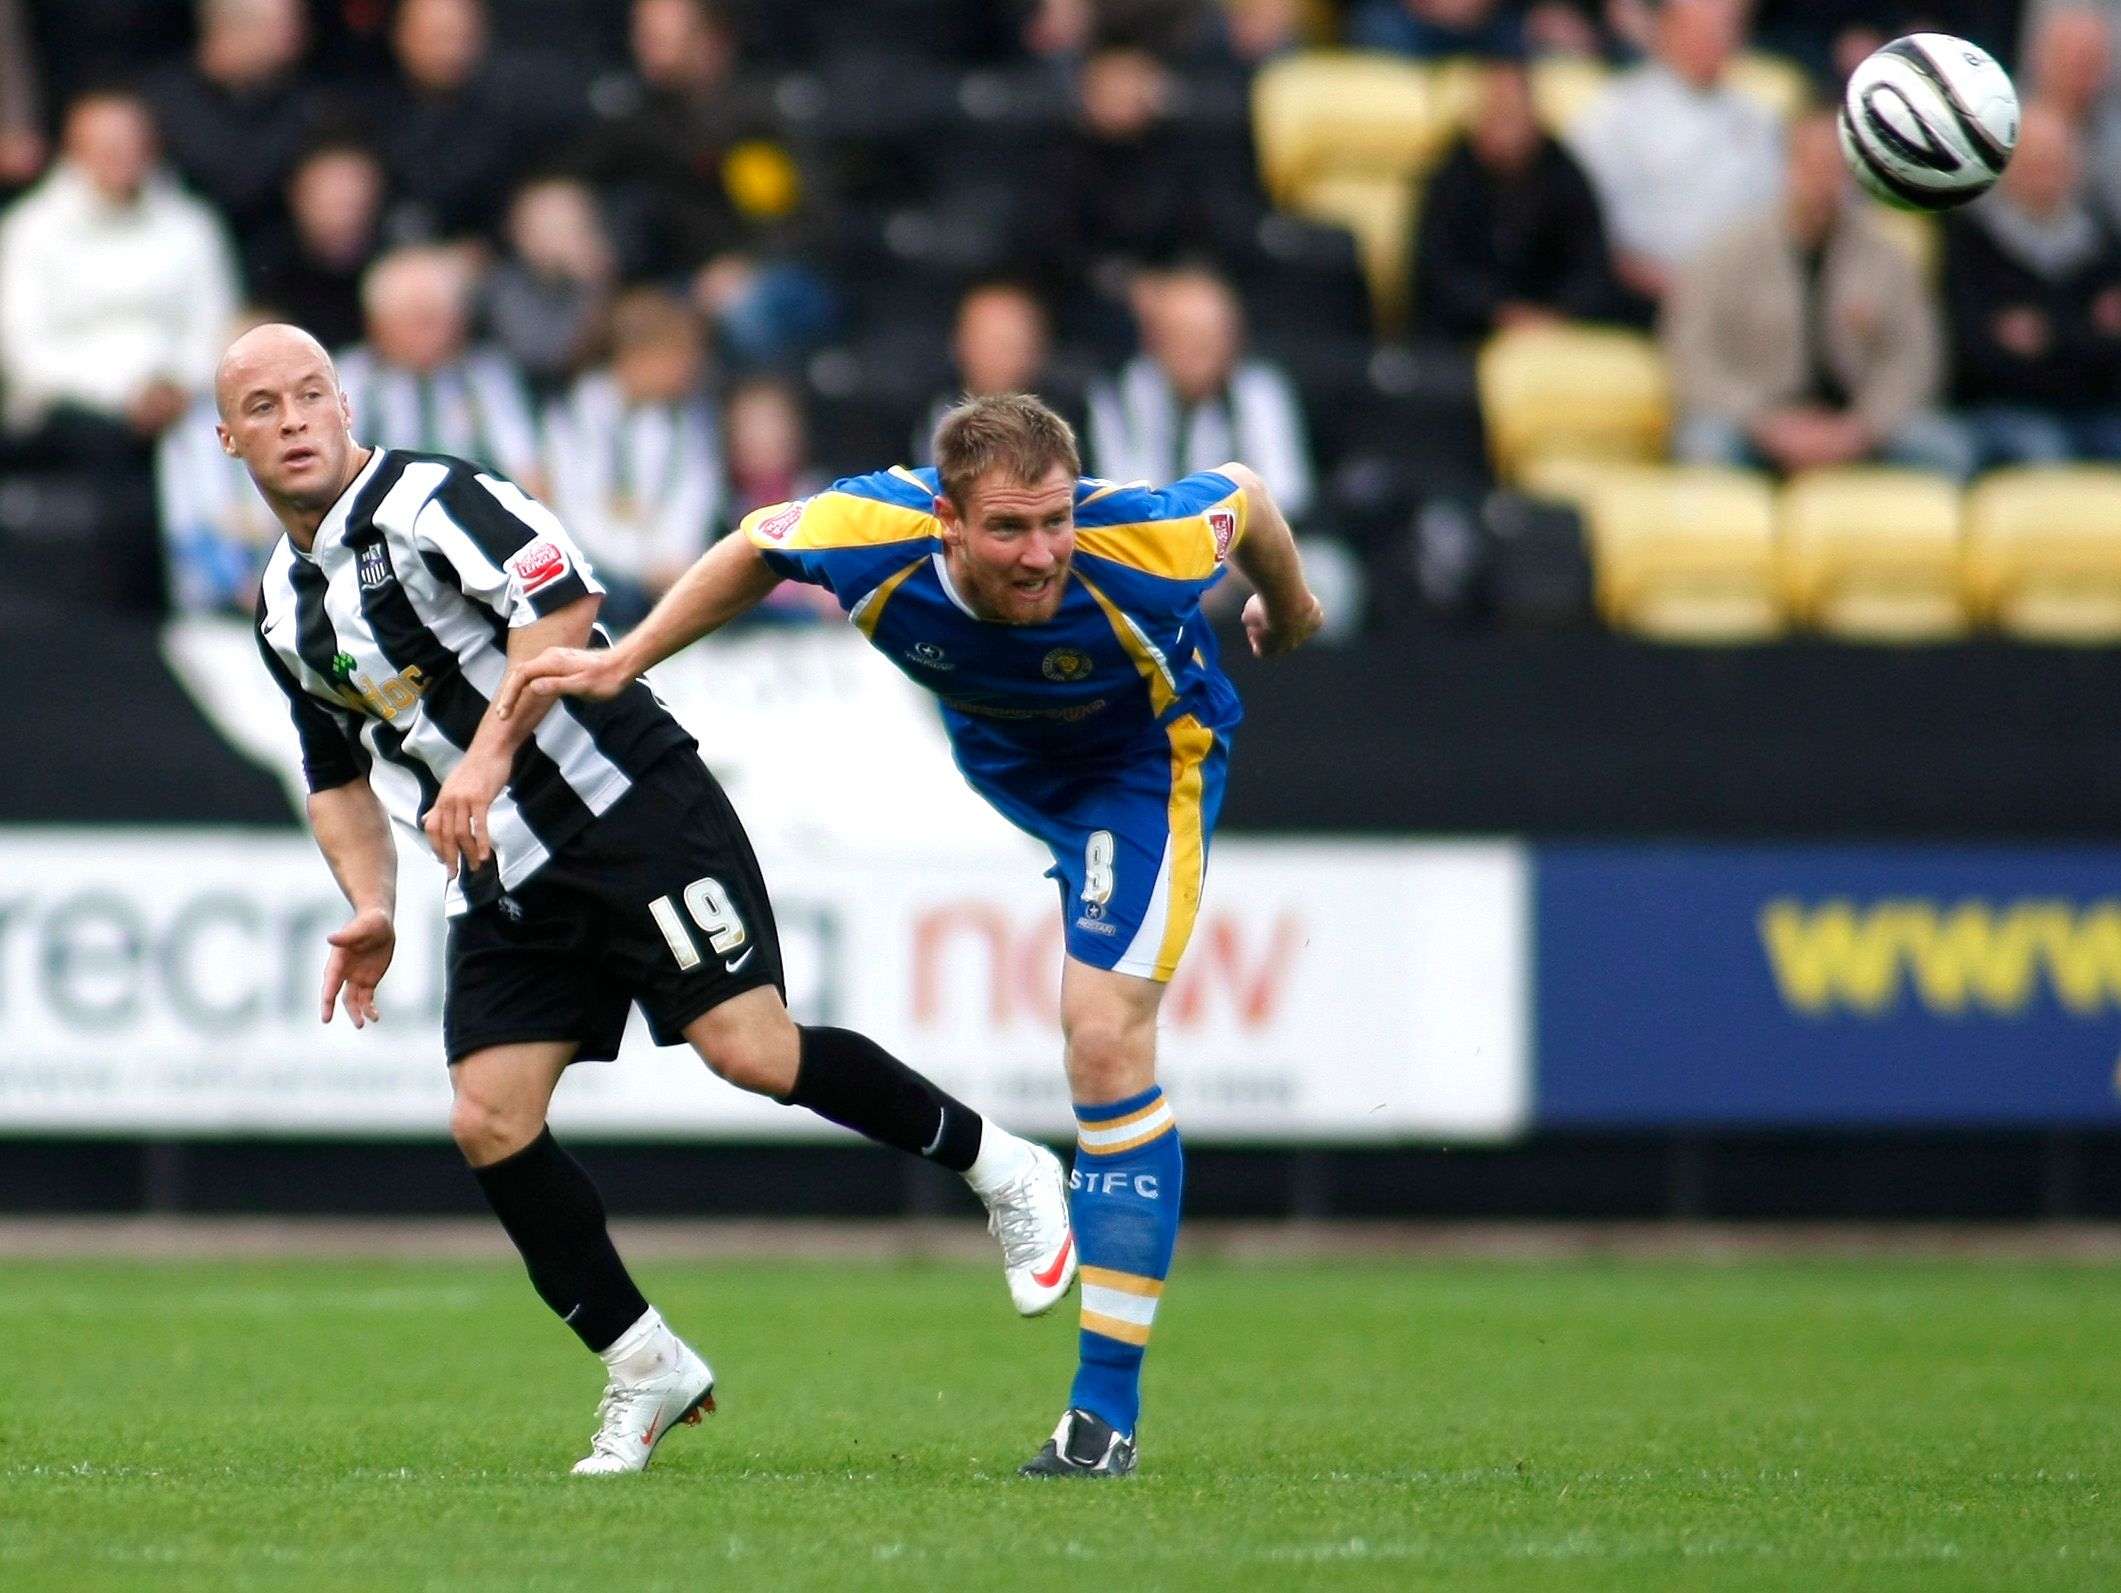 Football - Notts County v Shrewsbury Town - Coca-Cola Football League Two - Meadow Lane - 09/10 - 31/10/09 
Notts County's Luke Rodgers in action against Shrewsbury Town's Kelvin Langmead (R) 
Mandatory Credit: Action Images / Ian Smith